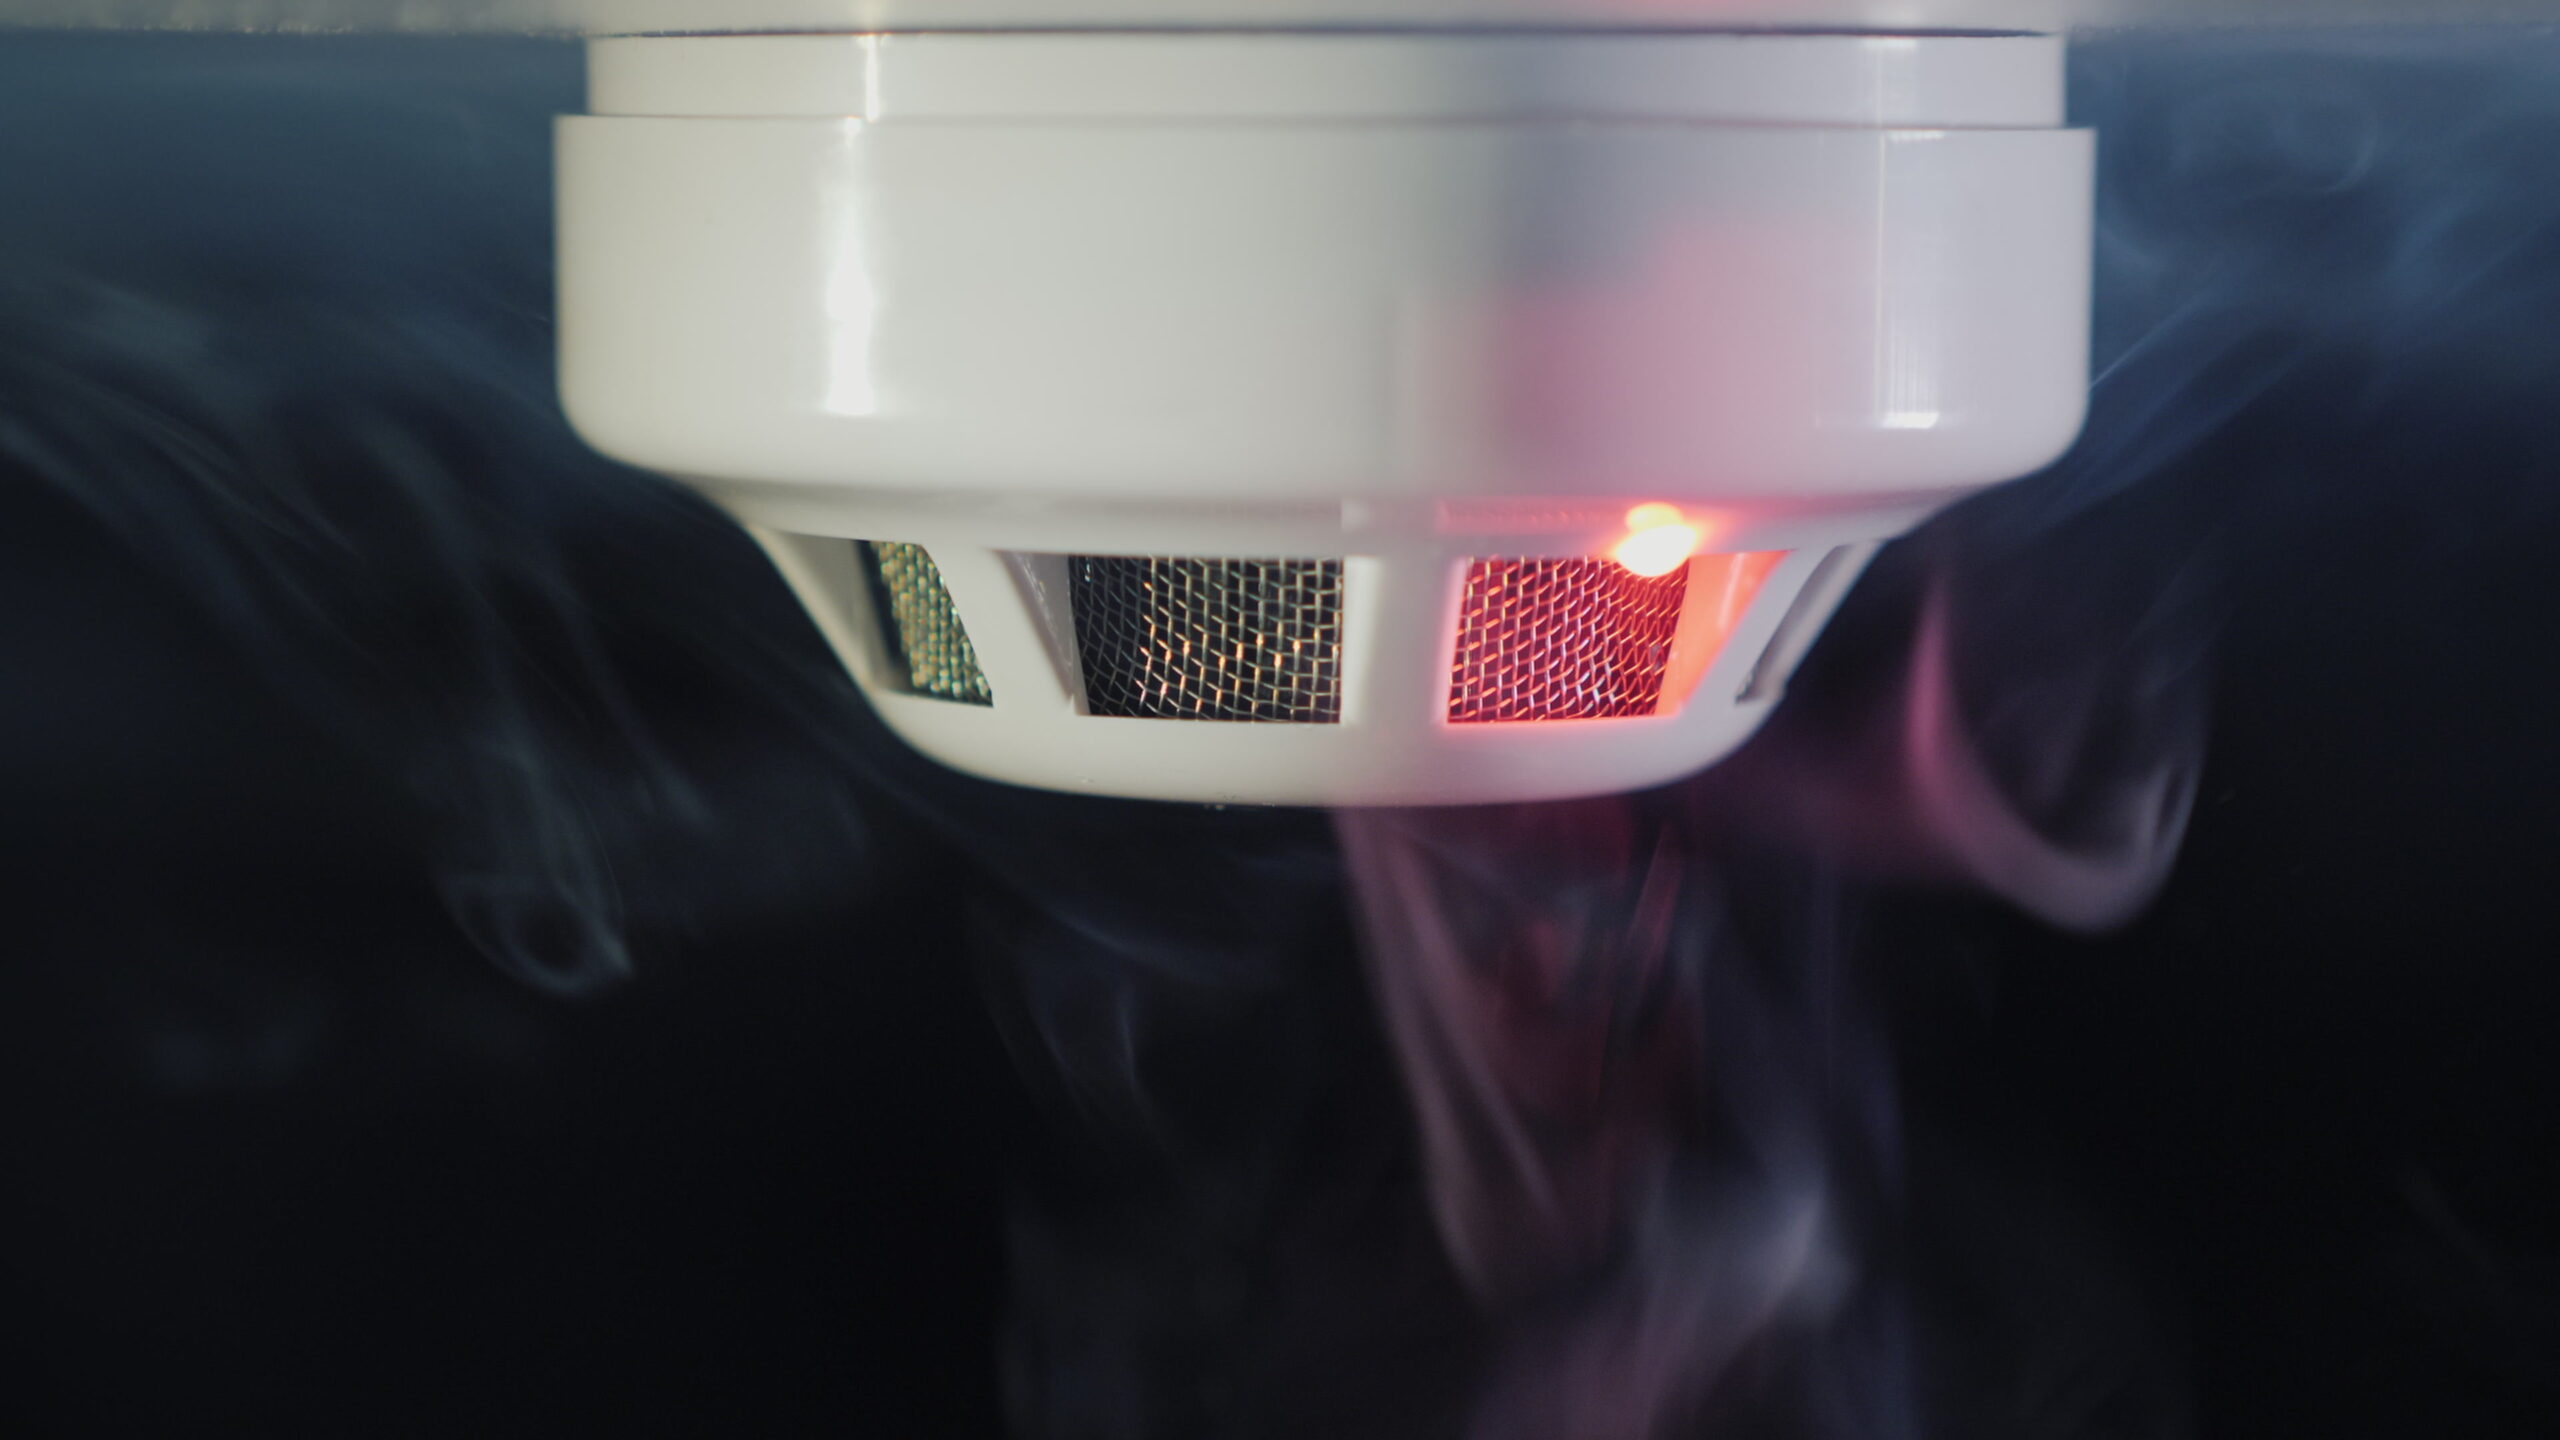 Close-up shot: The smoke detector is triggered by a trickle of dum, the red indicator lights up